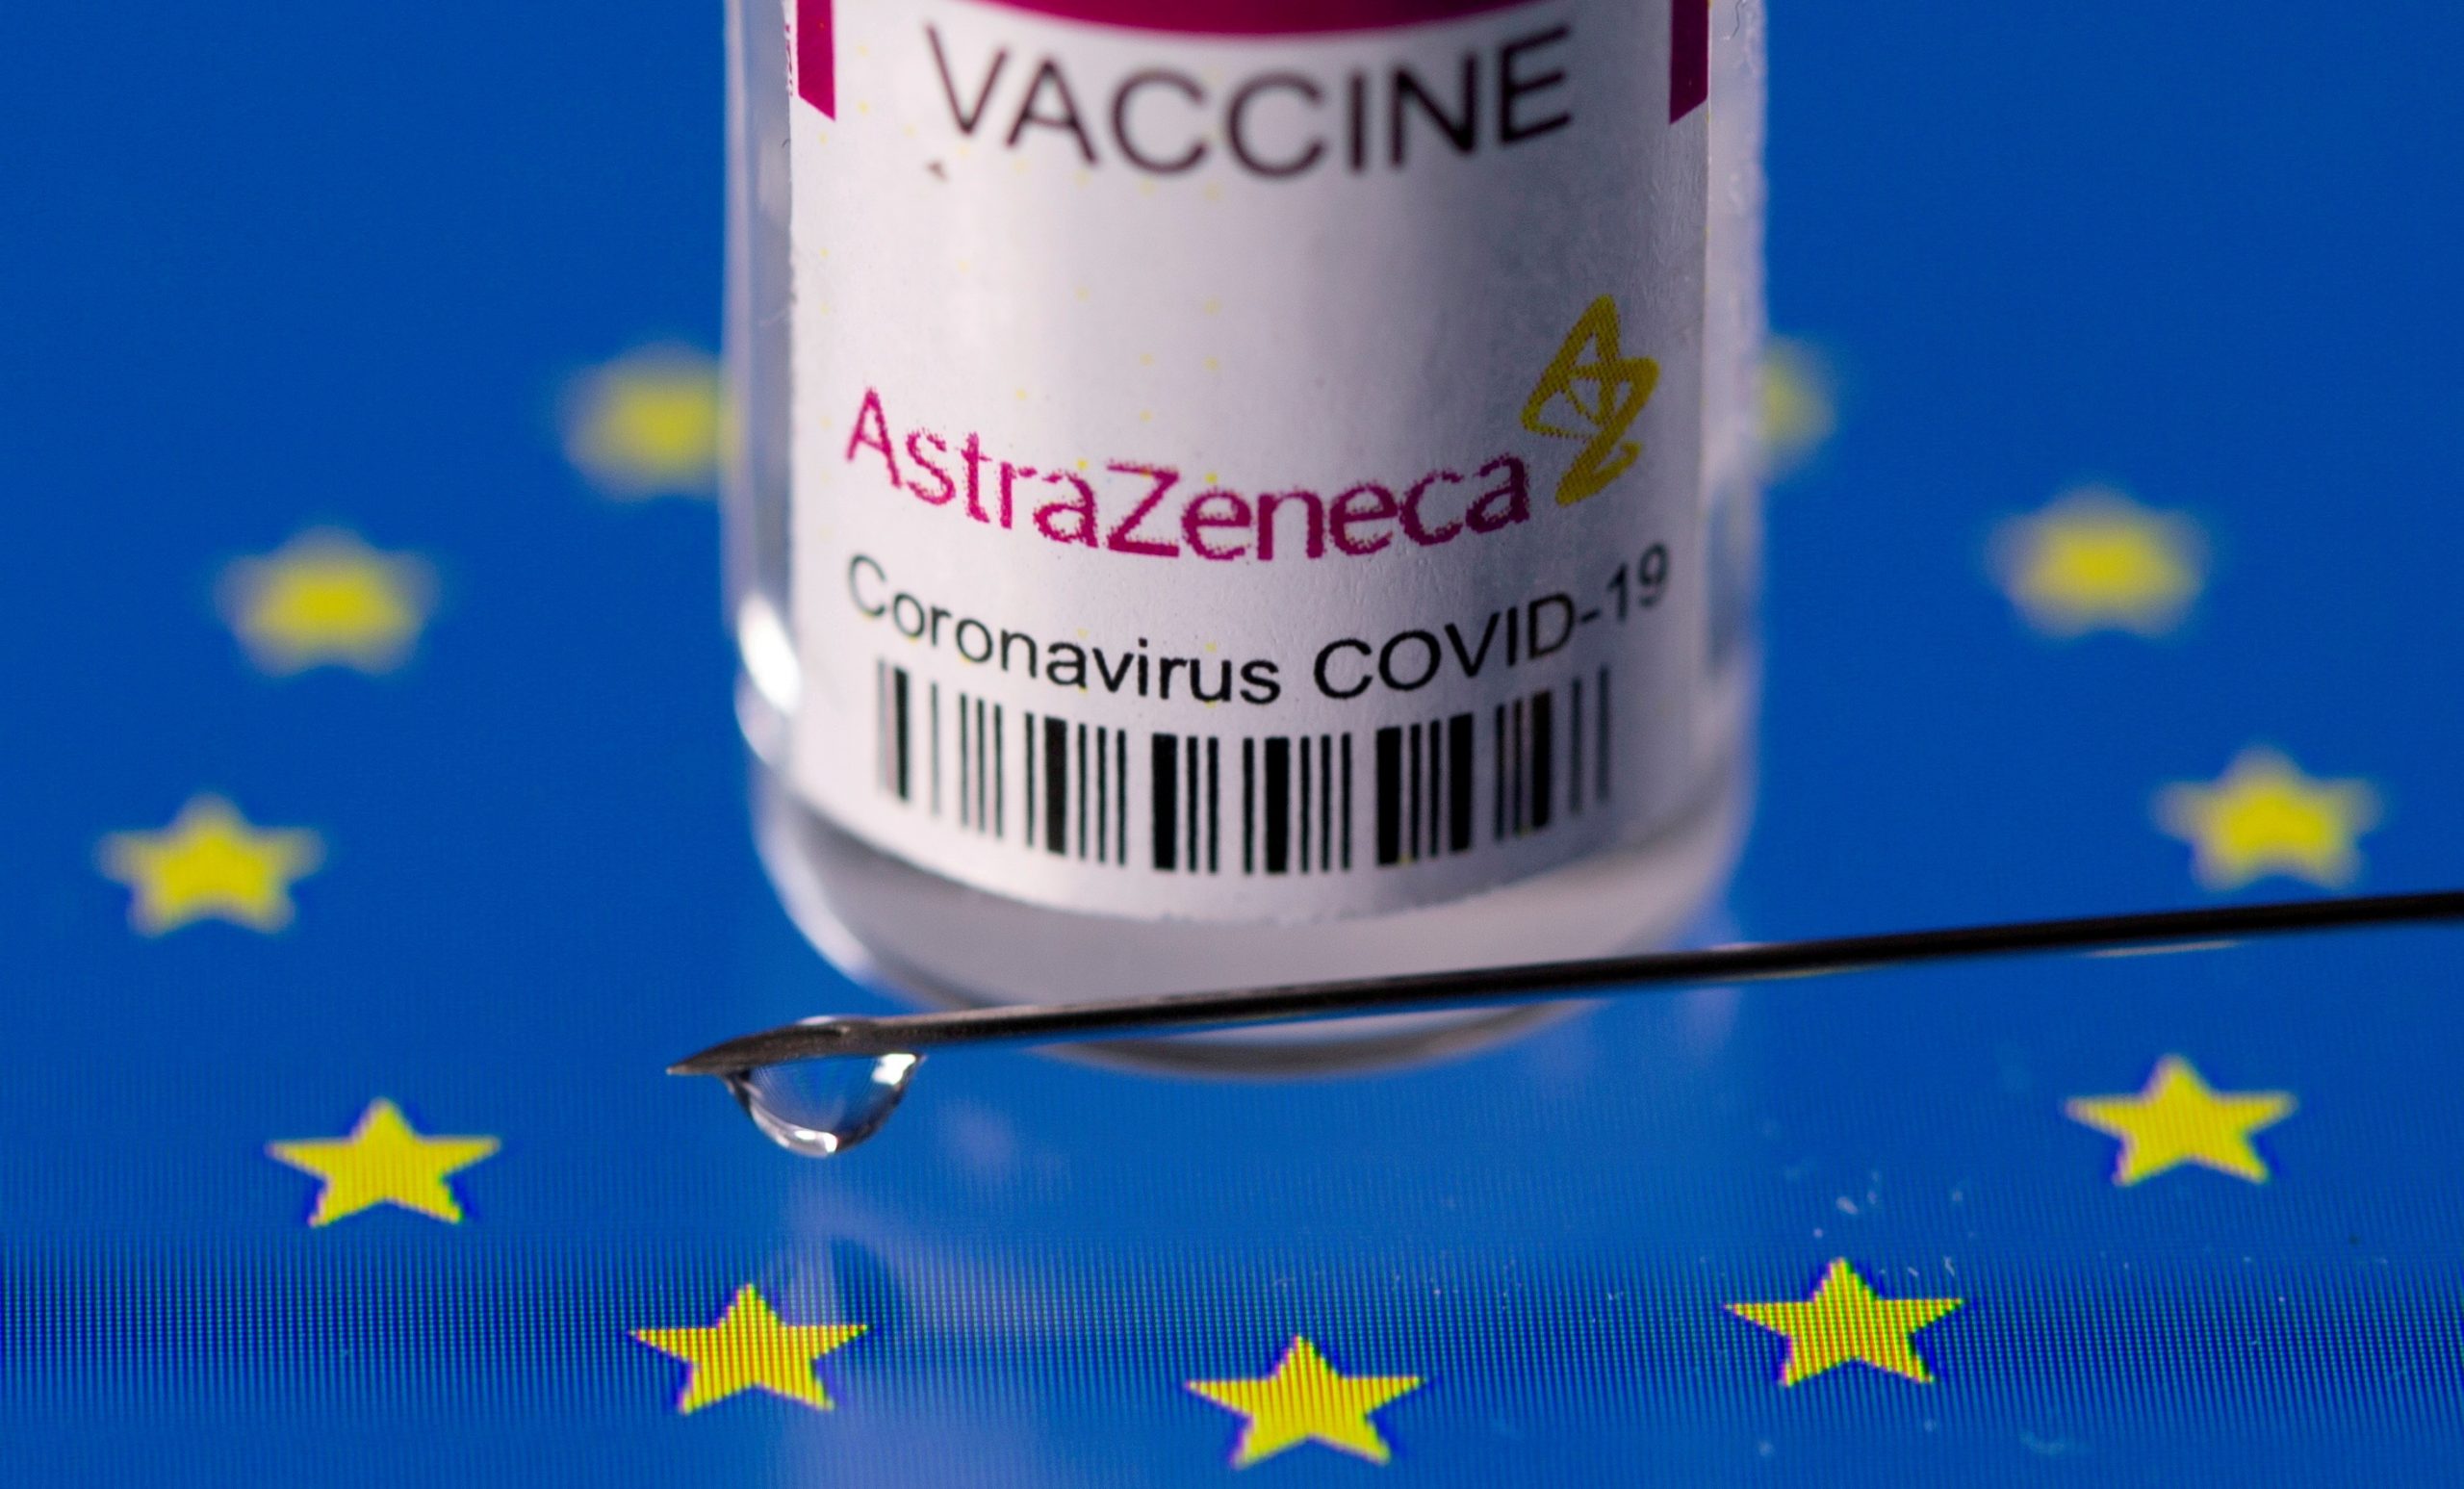 FILE PHOTO: Vial labelled "AstraZeneca coronavirus disease (COVID-19) vaccine" placed on displayed EU flag is seen in this illustration picture FILE PHOTO: Vial labelled "AstraZeneca coronavirus disease (COVID-19) vaccine" placed on displayed EU flag is seen in this illustration picture taken March 24, 2021. REUTERS/Dado Ruvic/Illustration/File Photo Dado Ruvic